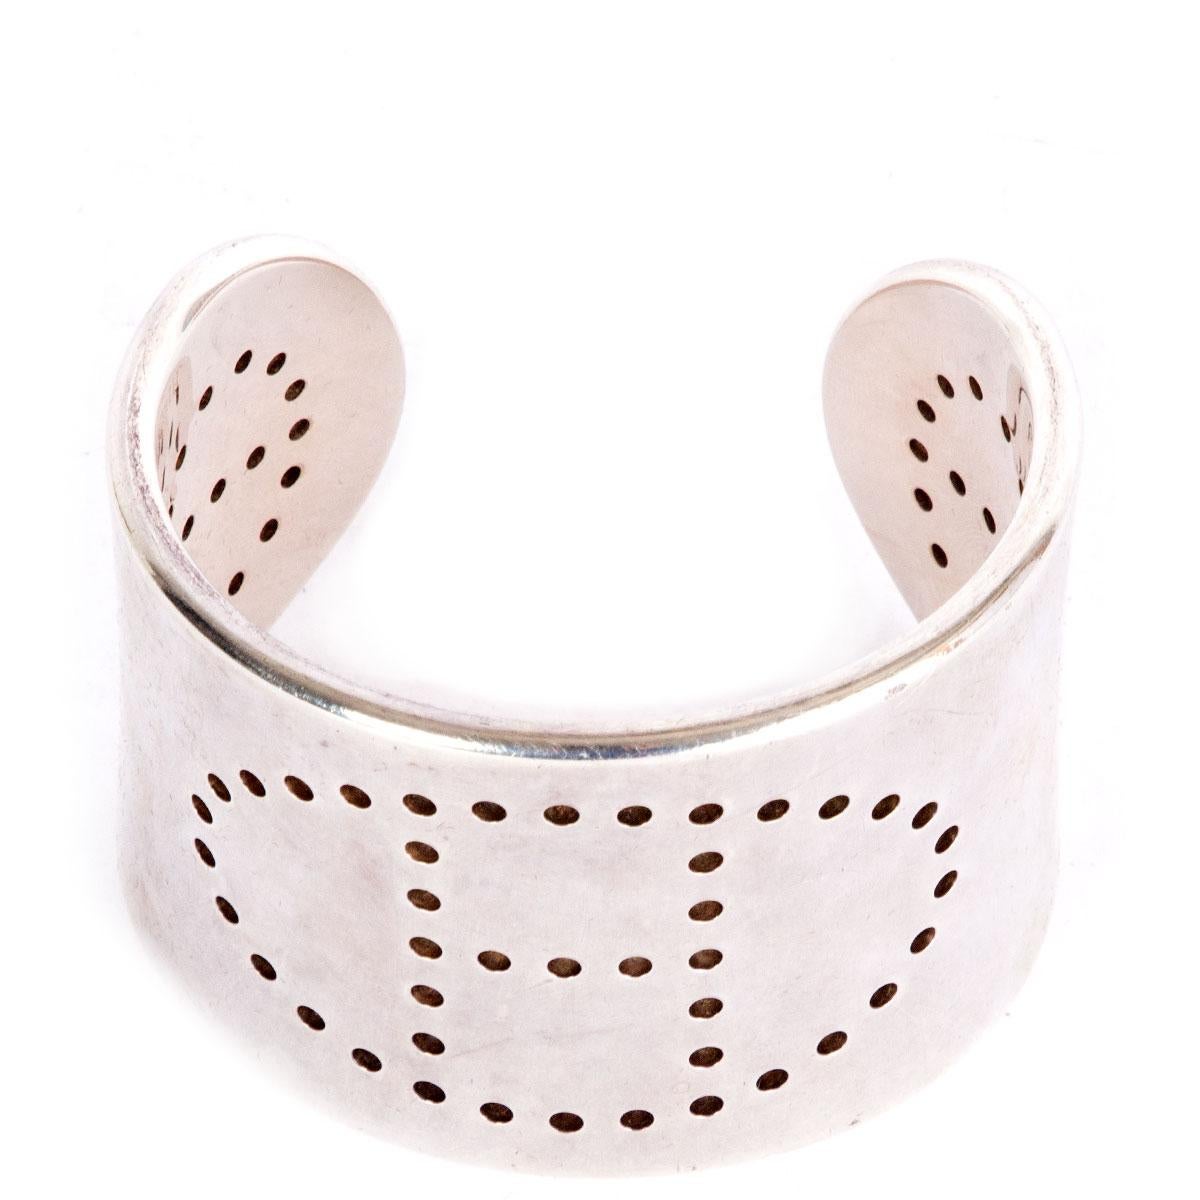 100% authentic Hermes Eclipse H cuff bracelet in Sterling Silver 925/1000. Has been worn with a few scratches and dents. Overall in very good condition. 

Tag Size SM
Size SM
Width 4cm (1.6in)
Length 14.5cm (5.7in)
Circumference 13cm (5.1in)

All